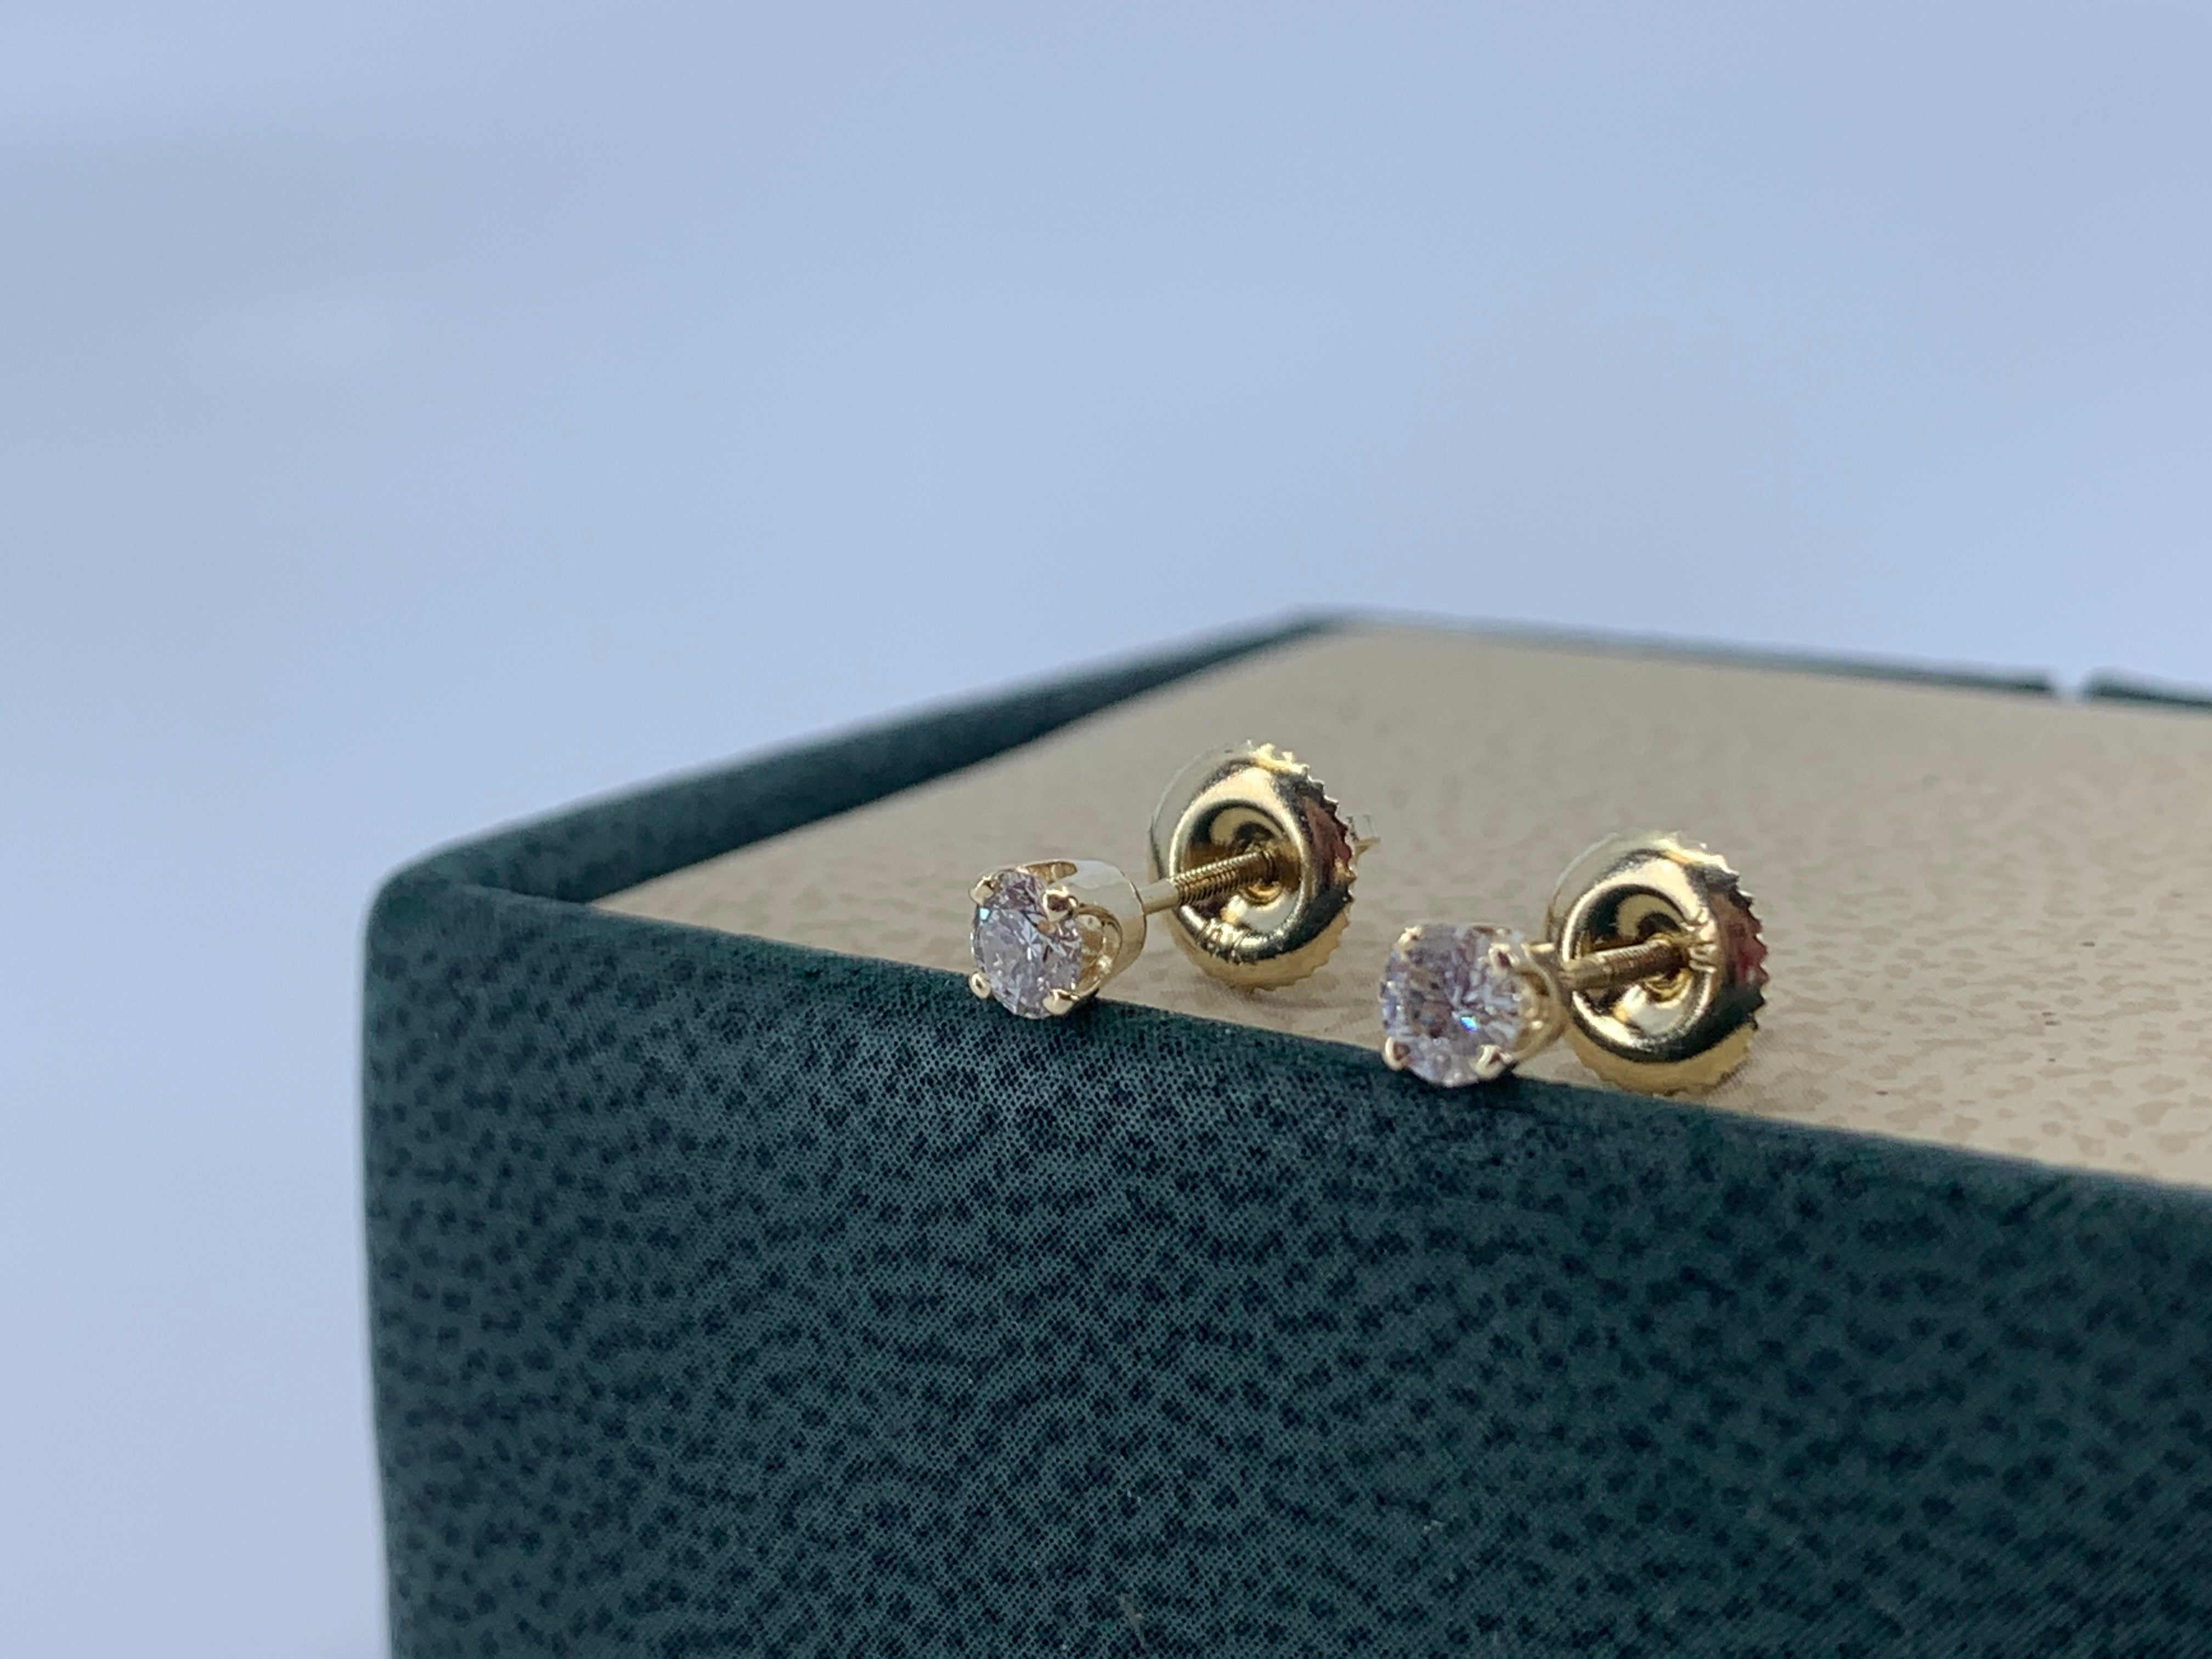 14K Yellow Gold Diamond Studs .32 Carat Total Weight with Screw Back Post